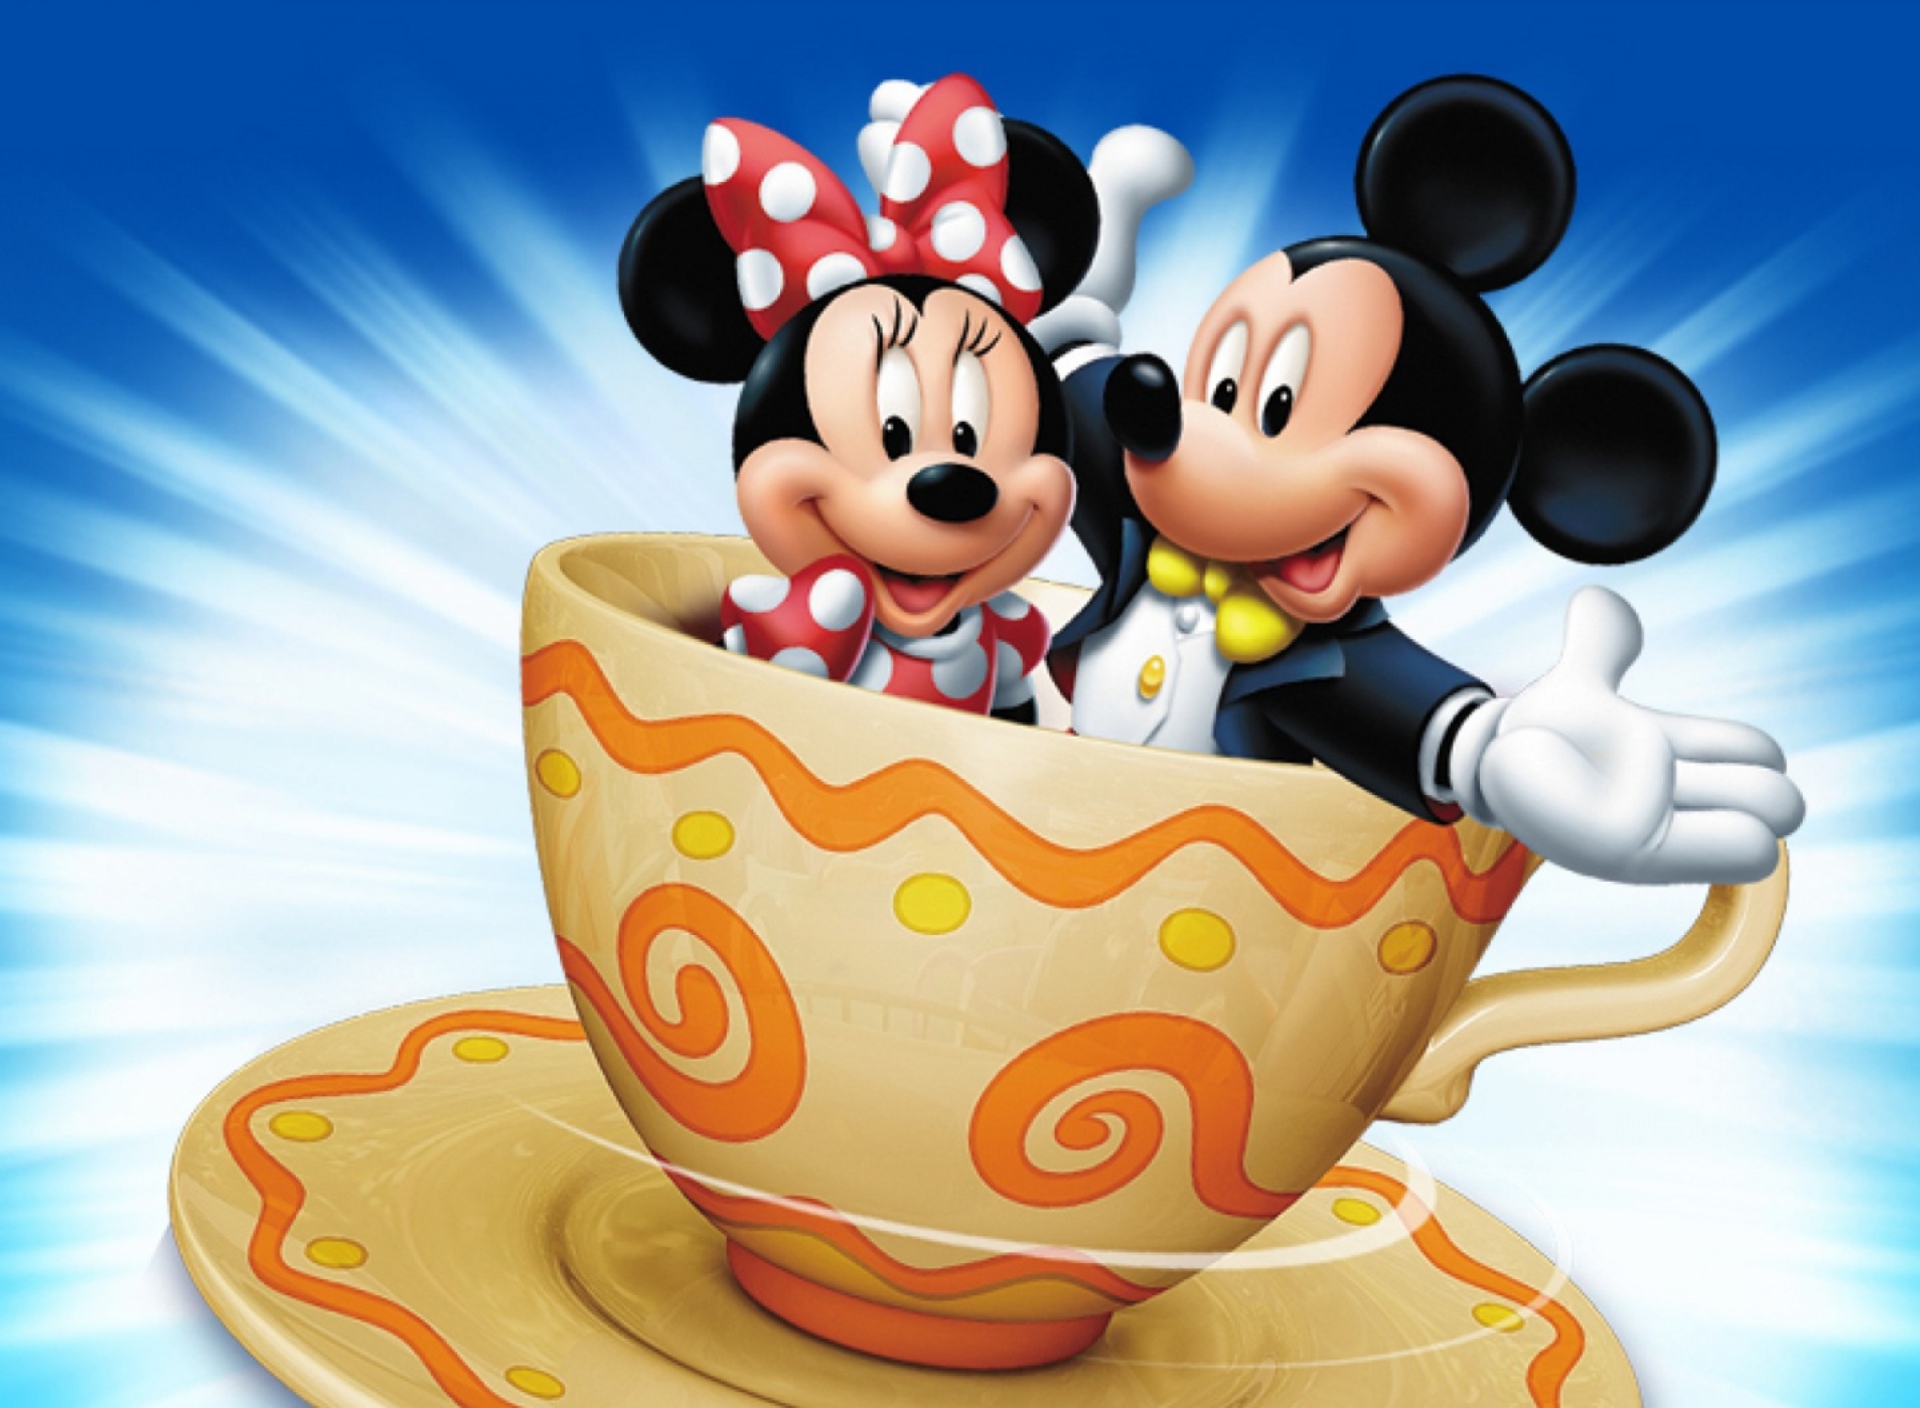 Mickey And Minnie Mouse In Cup wallpaper 1920x1408